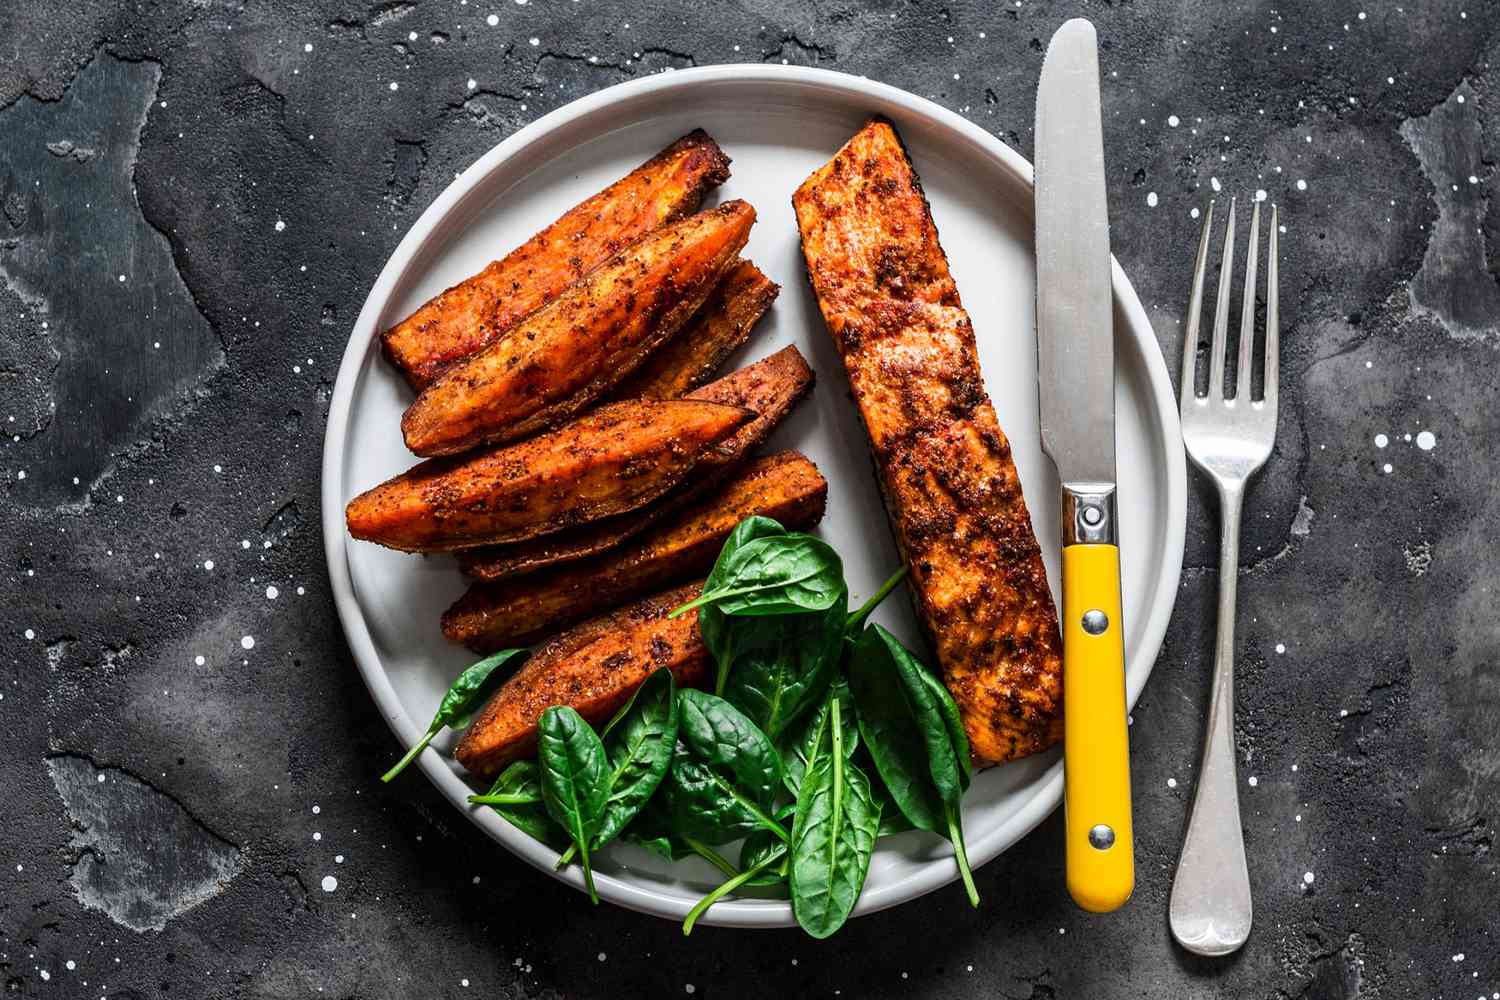 Crispy spice crust baked salmon with sweet potato and spinach - healthy balanced lunch on dark background, top view